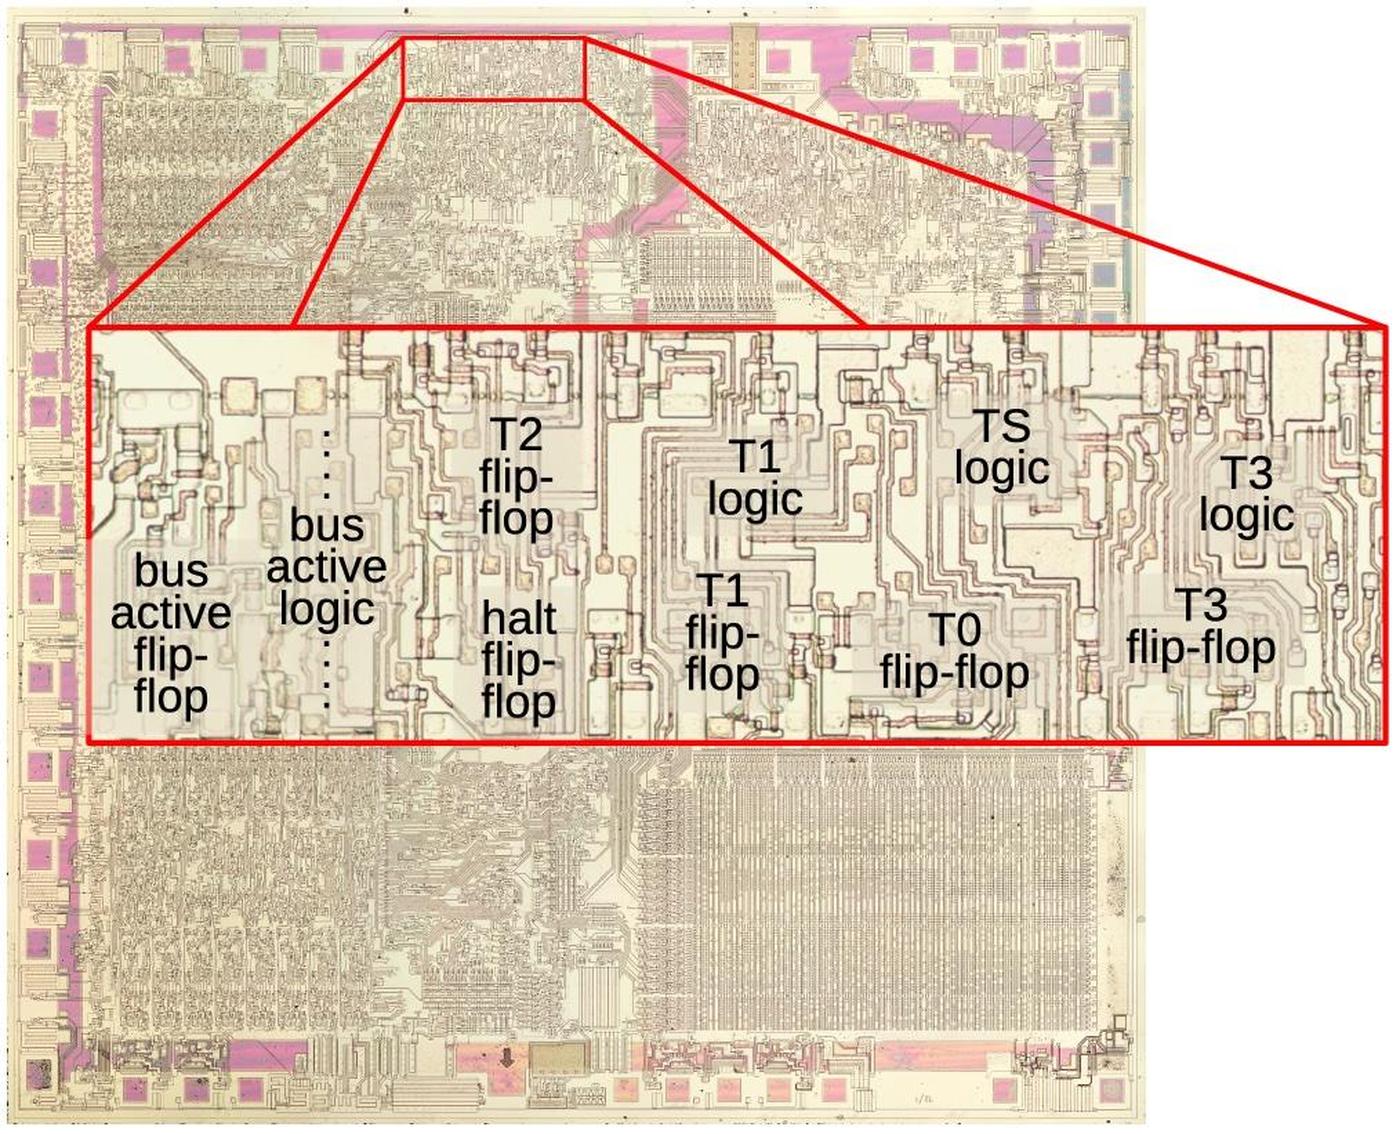 The bus state machine circuitry on the die.